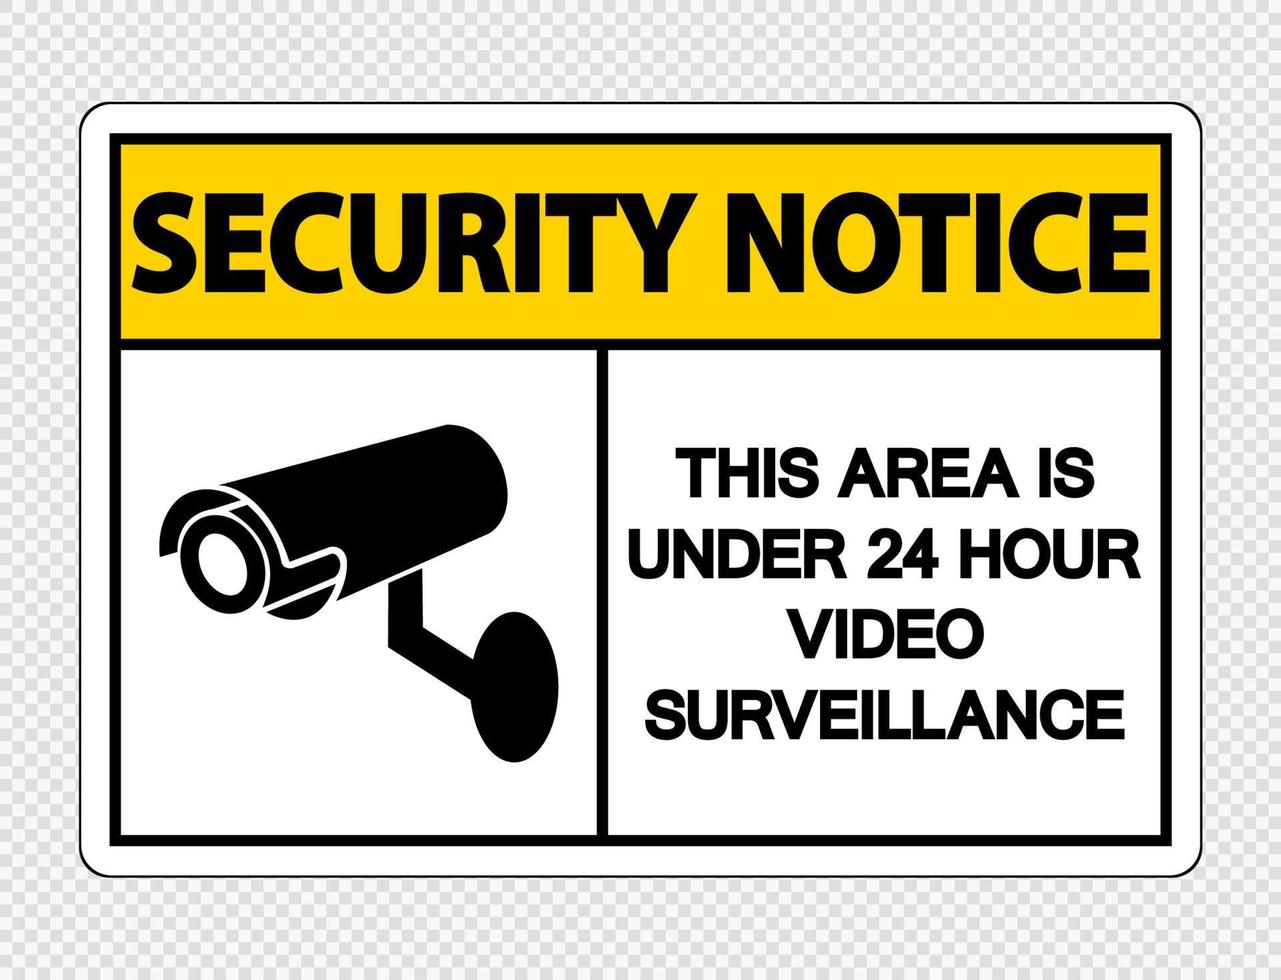 Security notice This Area is Under 24 Hour Video Surveillance Sign on transparent background vector